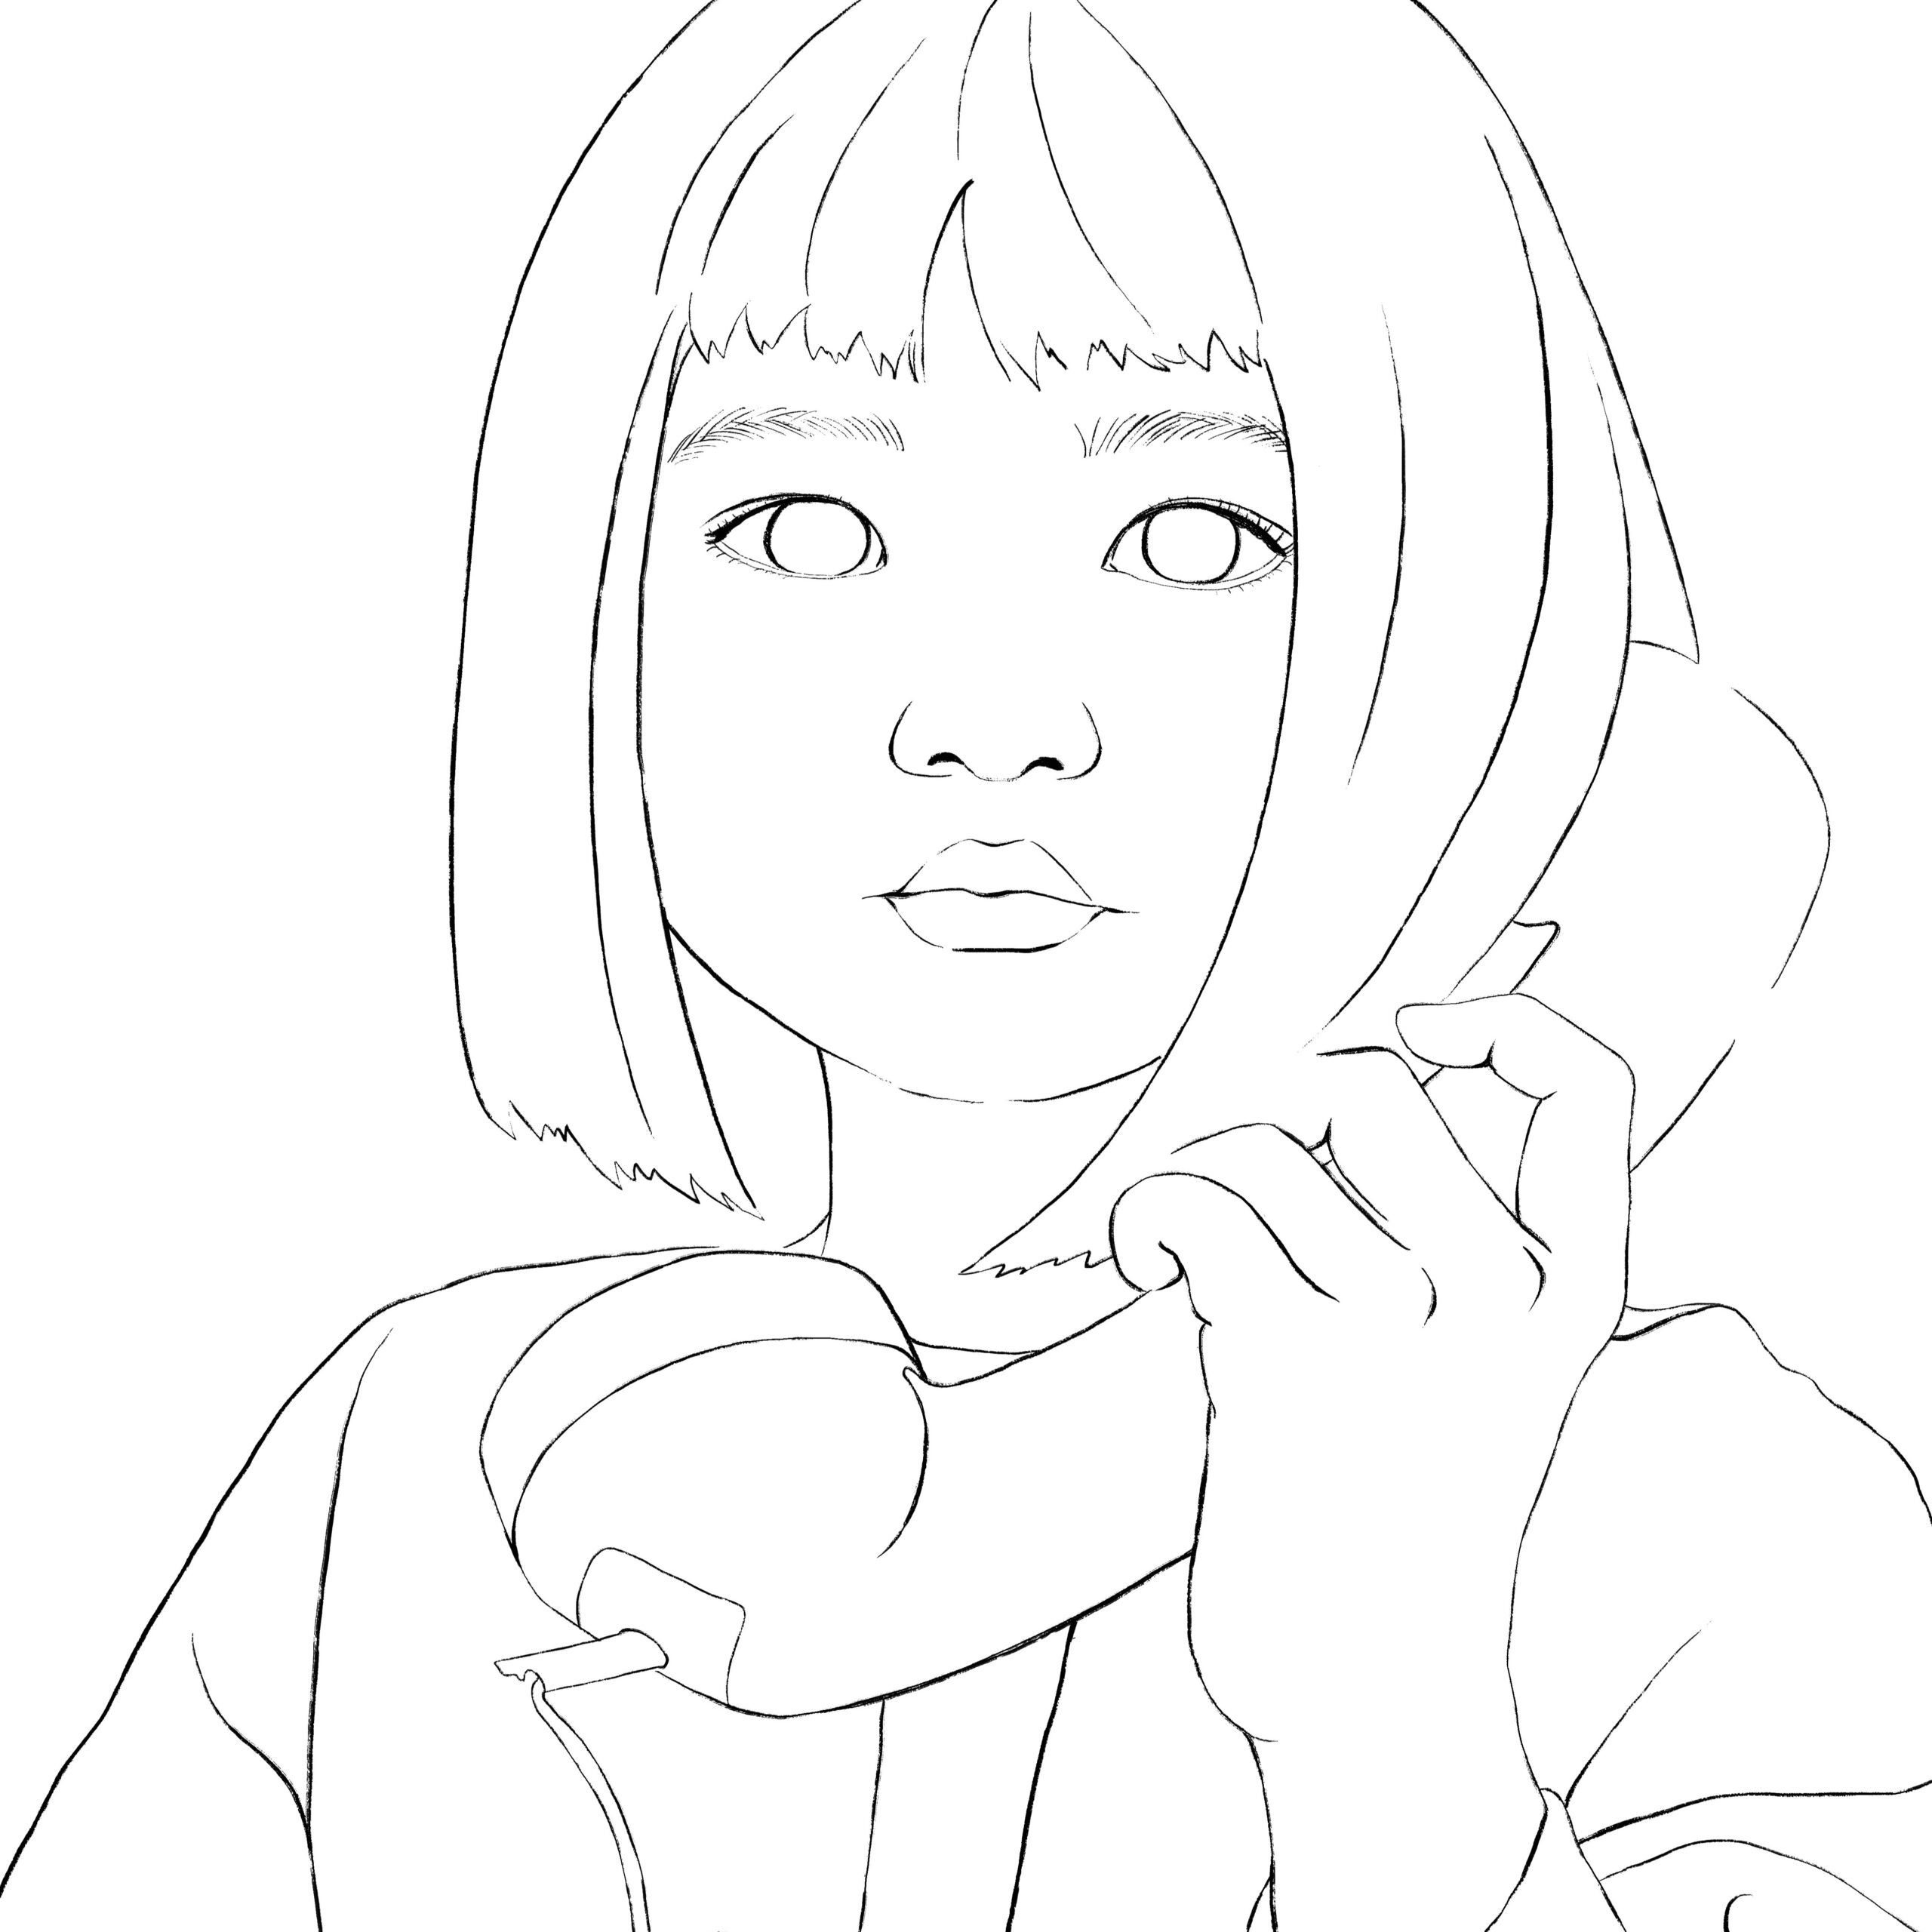 Telephone coloring sheet with black linework and white background. Shows young girl with short hair and bangs holding a telephone with a cord.